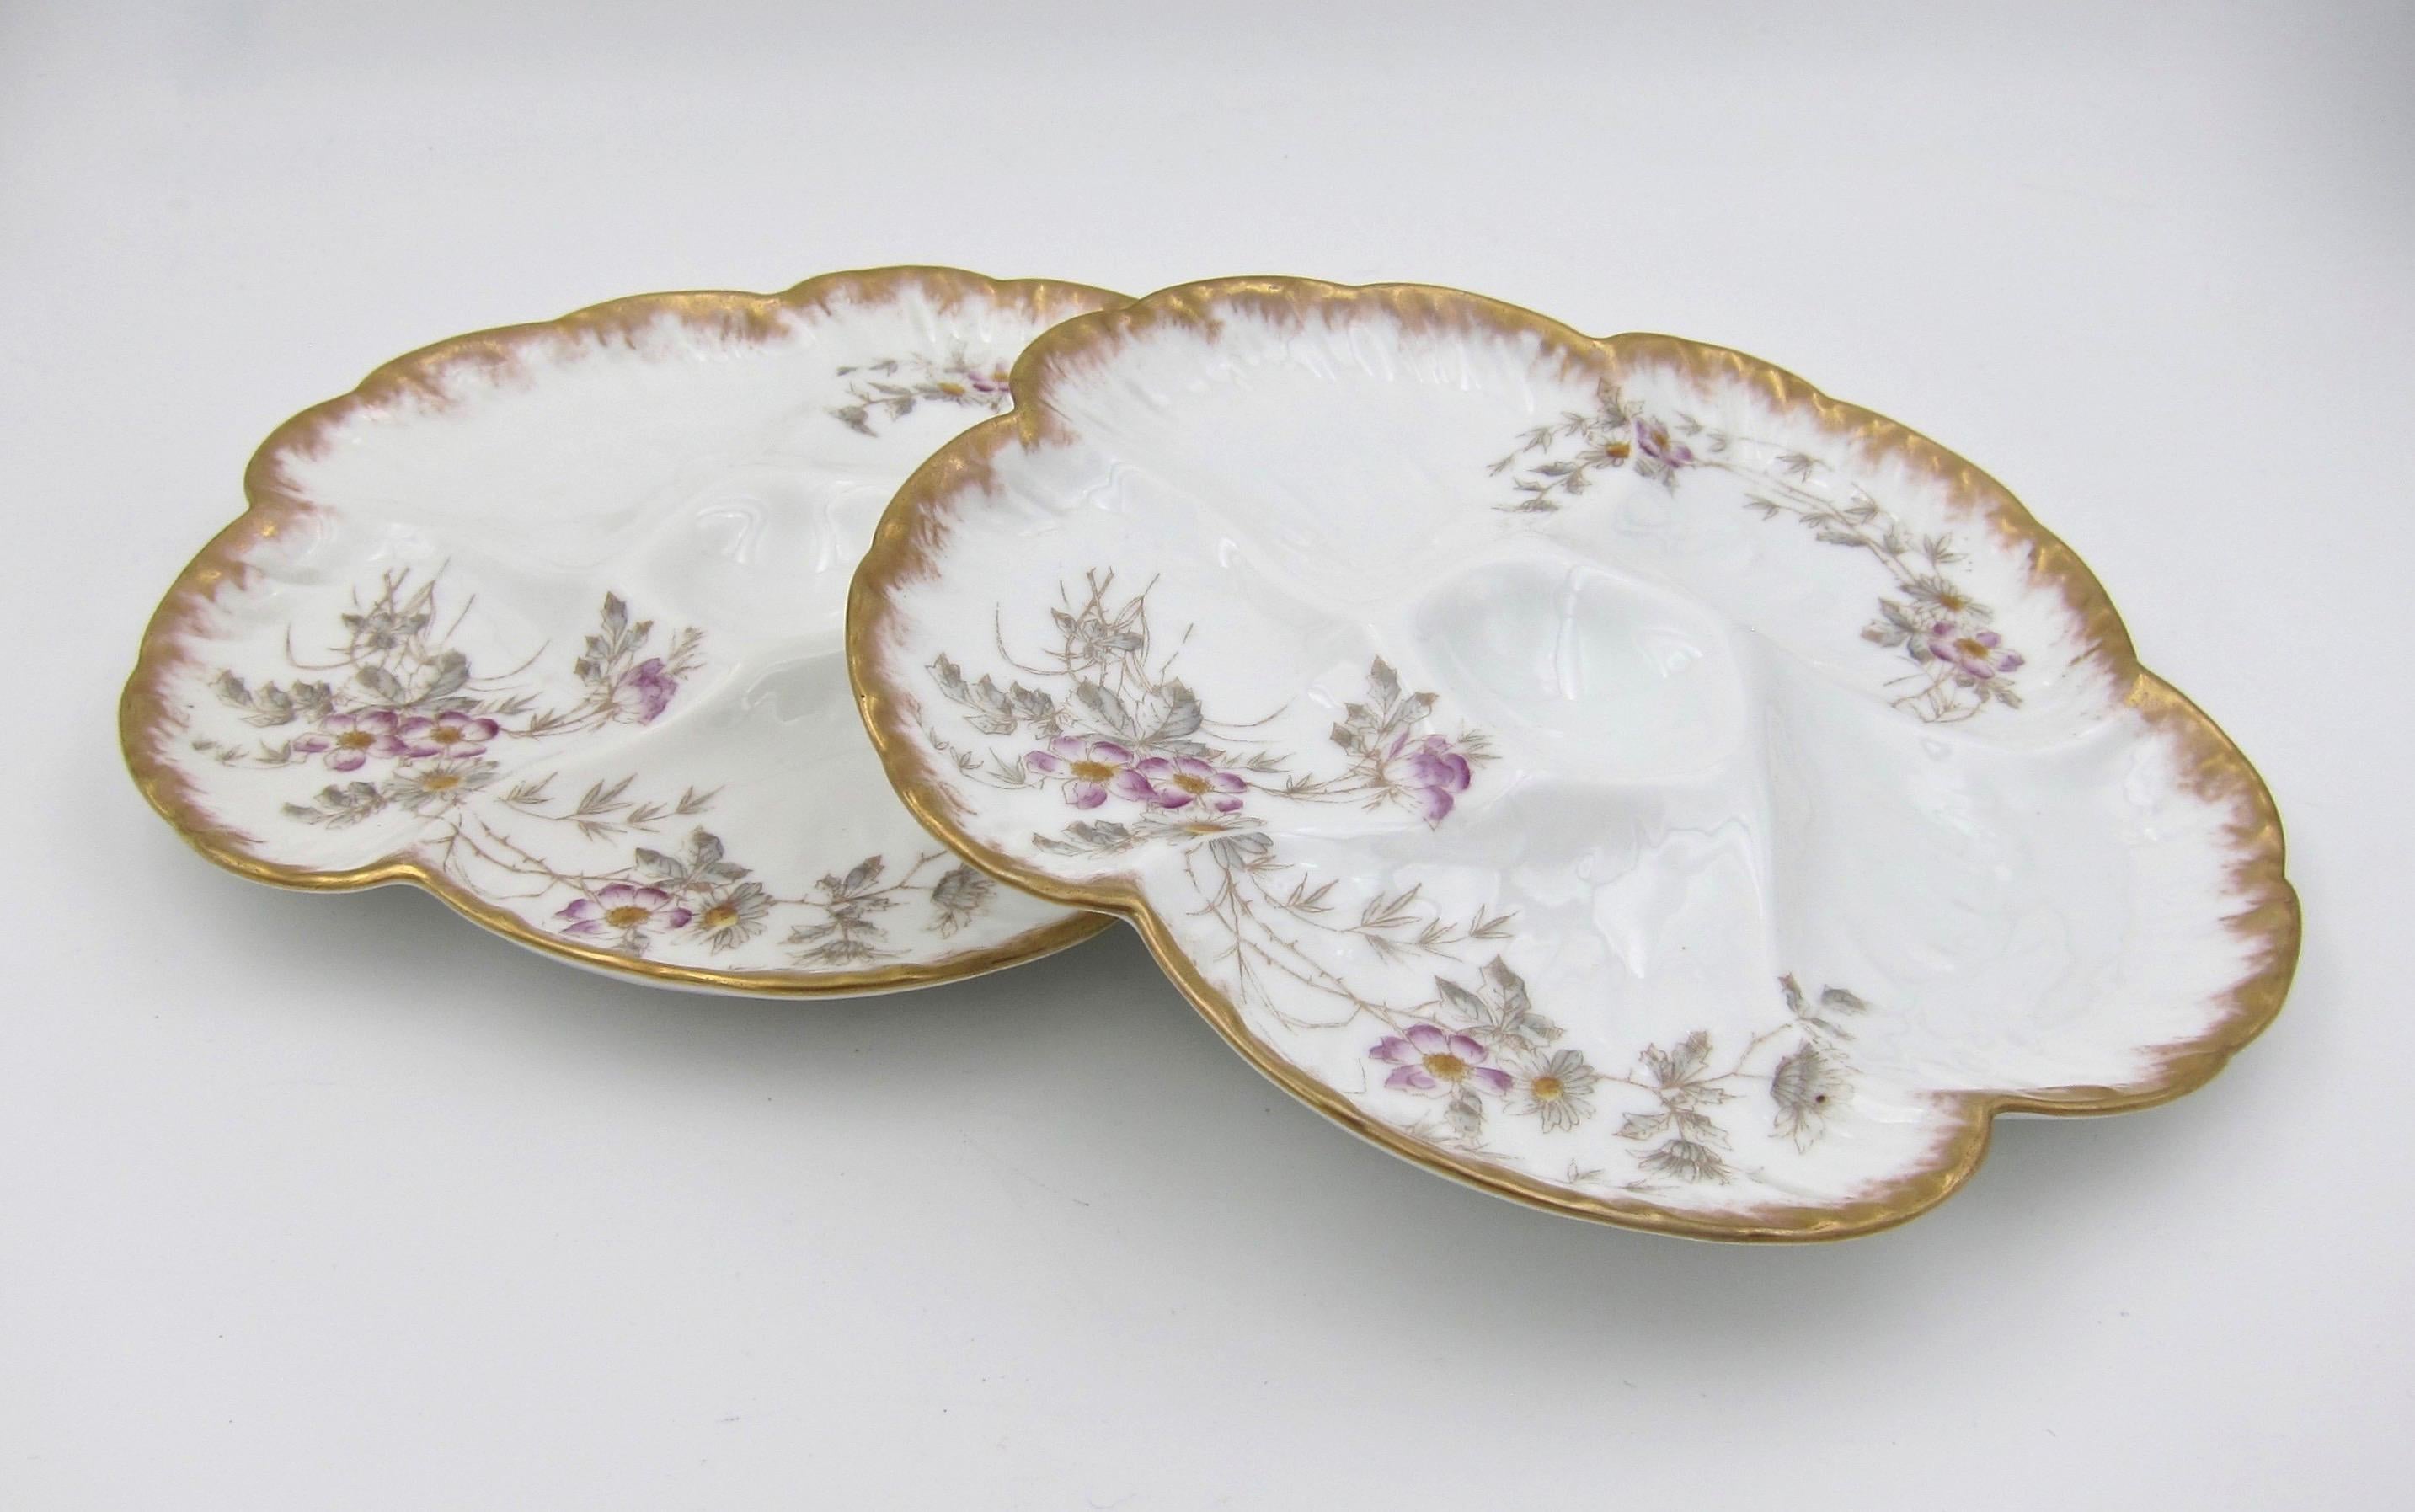 A French pair of antique porcelain oyster plates from Société Gérard, Dufraisseix and Morel (formerly Charles Field Haviland) of Limoges, France. The molded 'Wave' pattern design includes five wells for oysters over ice surrounding a smaller,